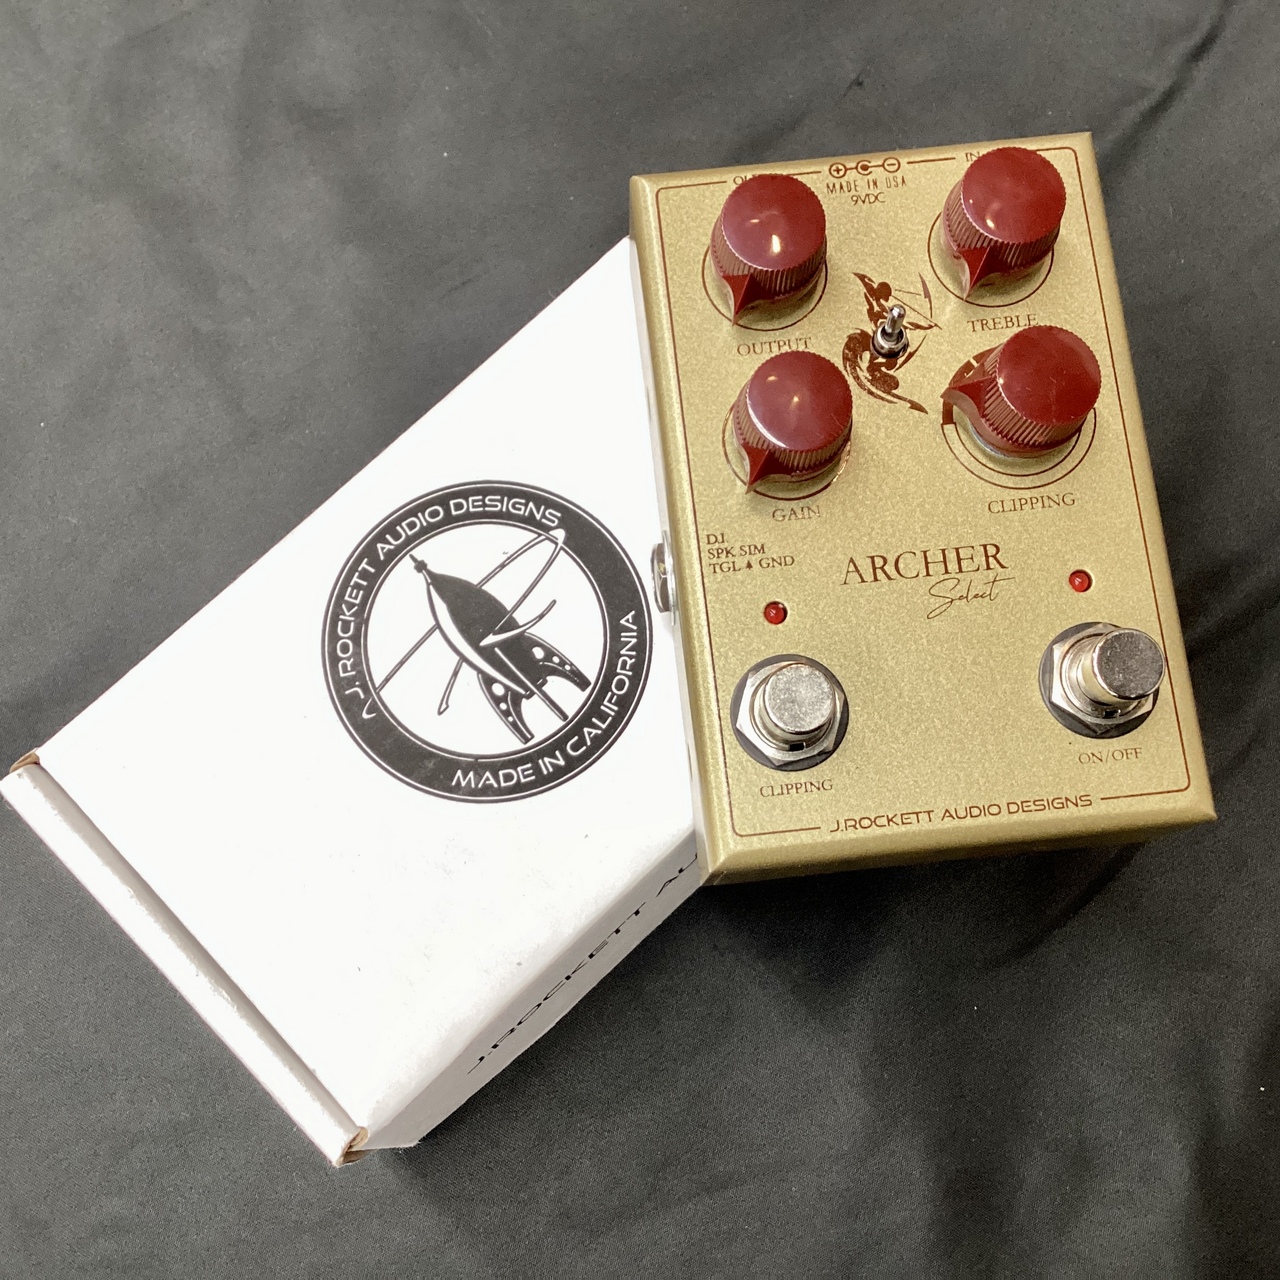 J.Rockett Audio Designs THE ARCHER SELECT(ジェイ・ロケット